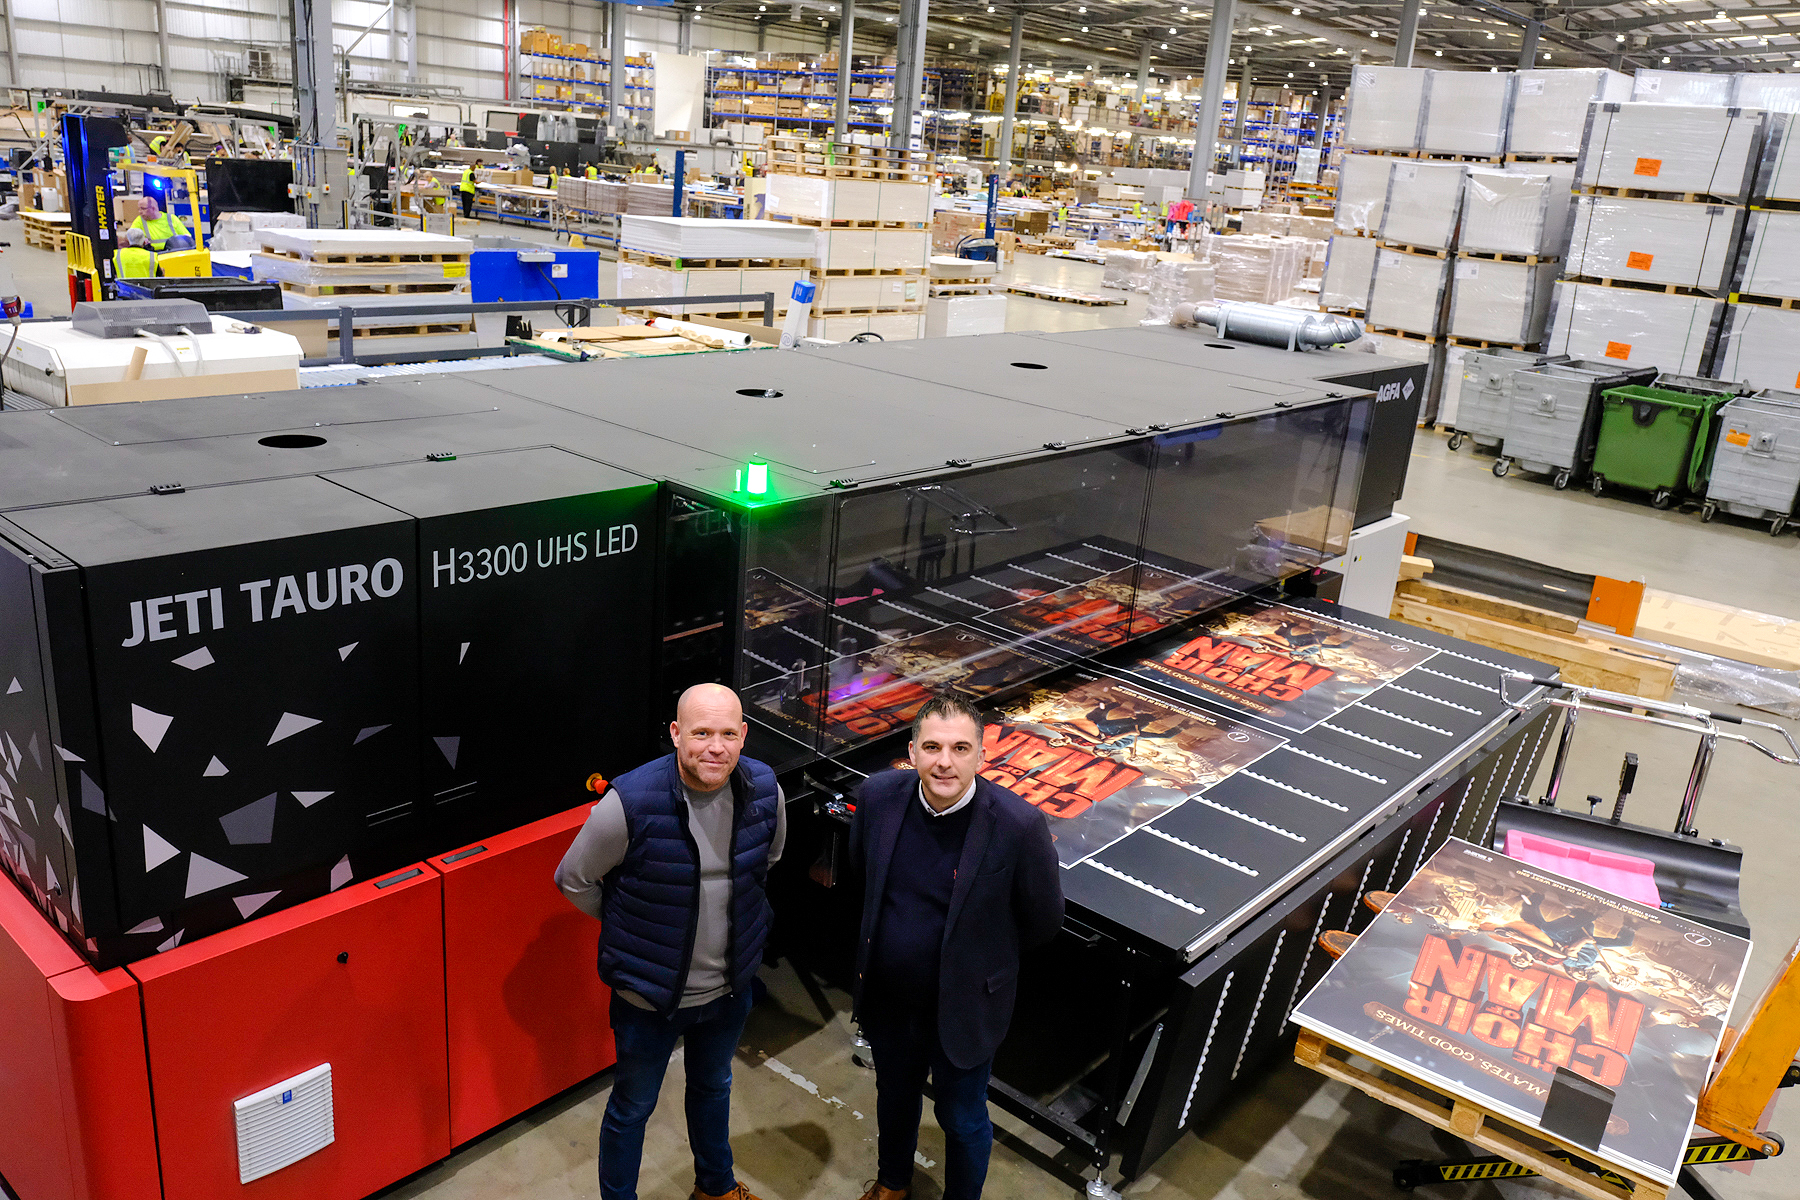 DELTA DISPLAY INVEST £1.2M IN TWO AGFA PRINT ENGINES